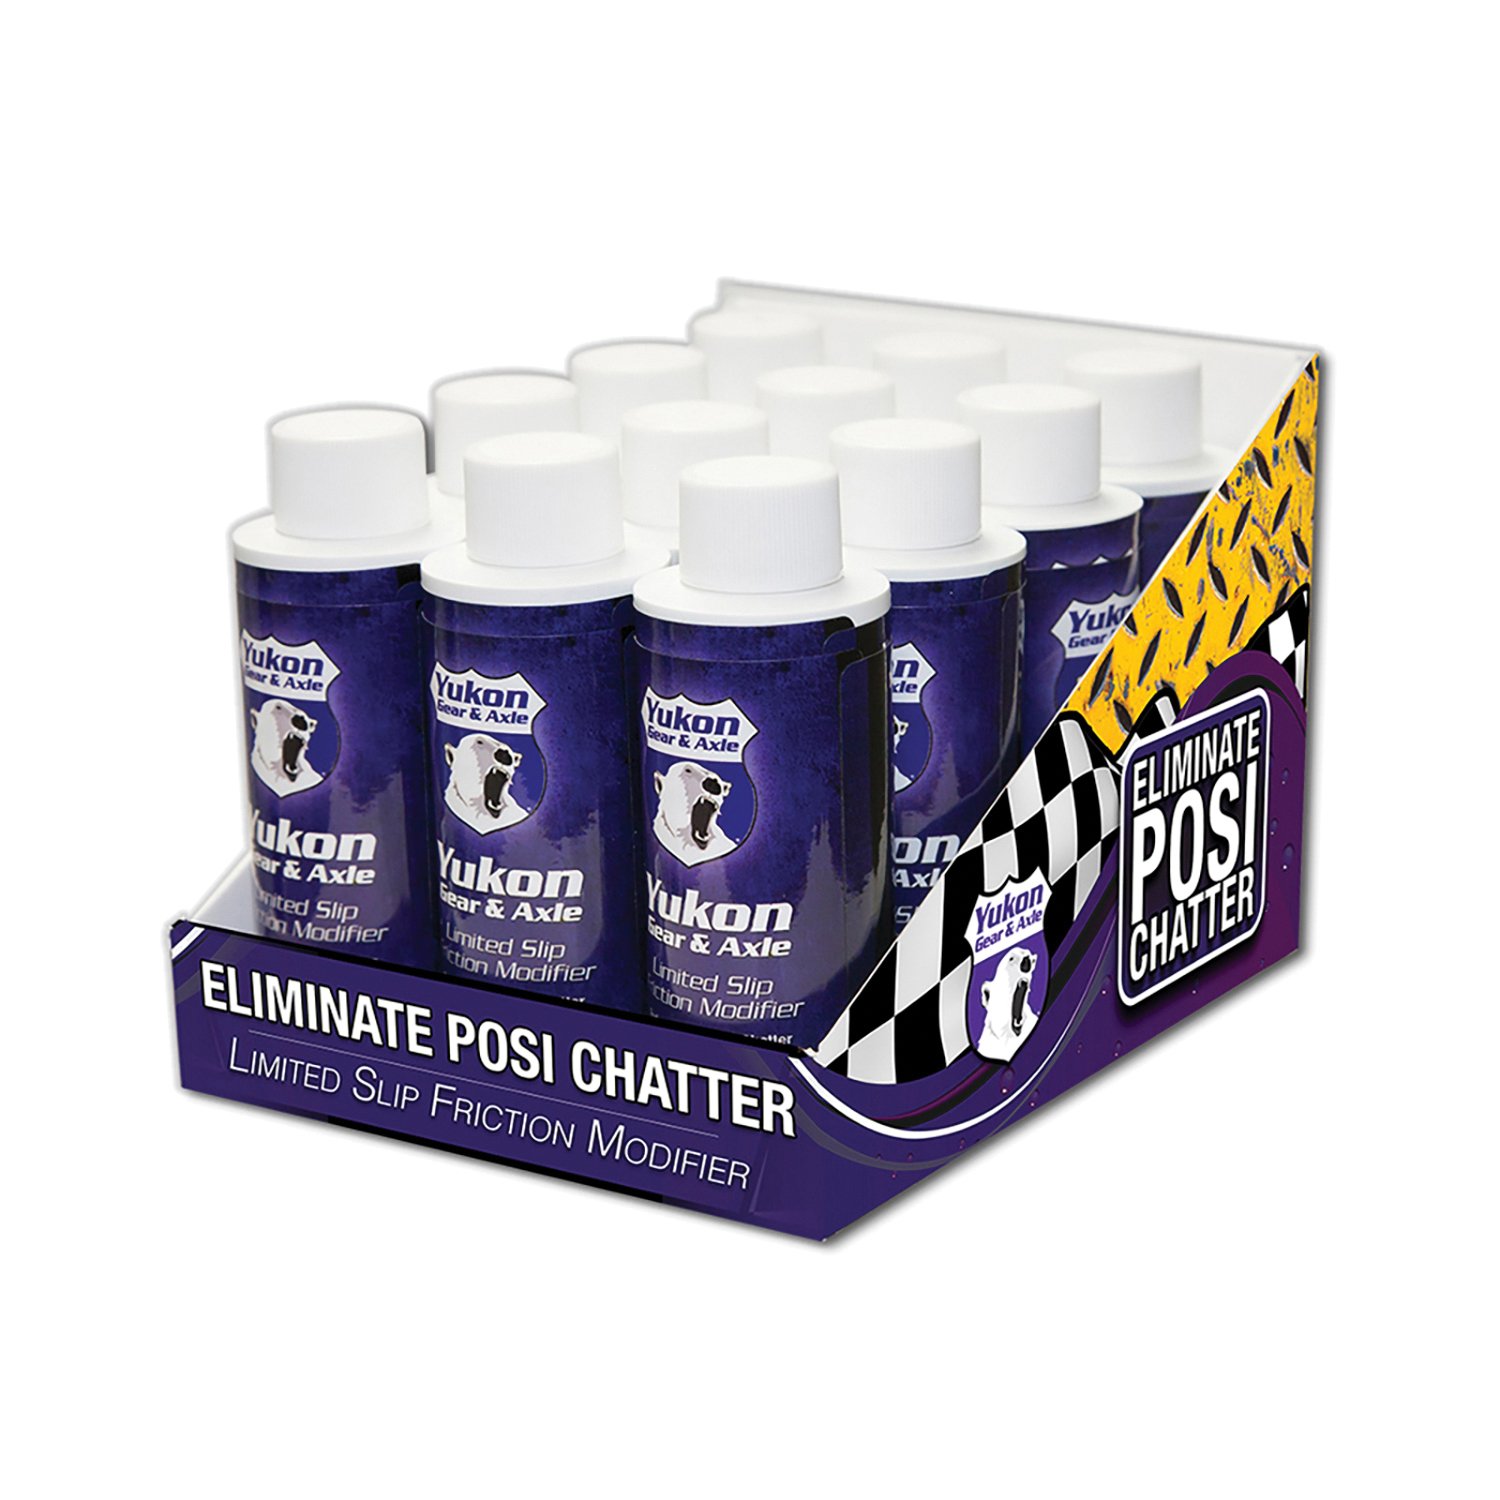 Friction Modifier Additive For Limited Slip/Posi - 12 Pack